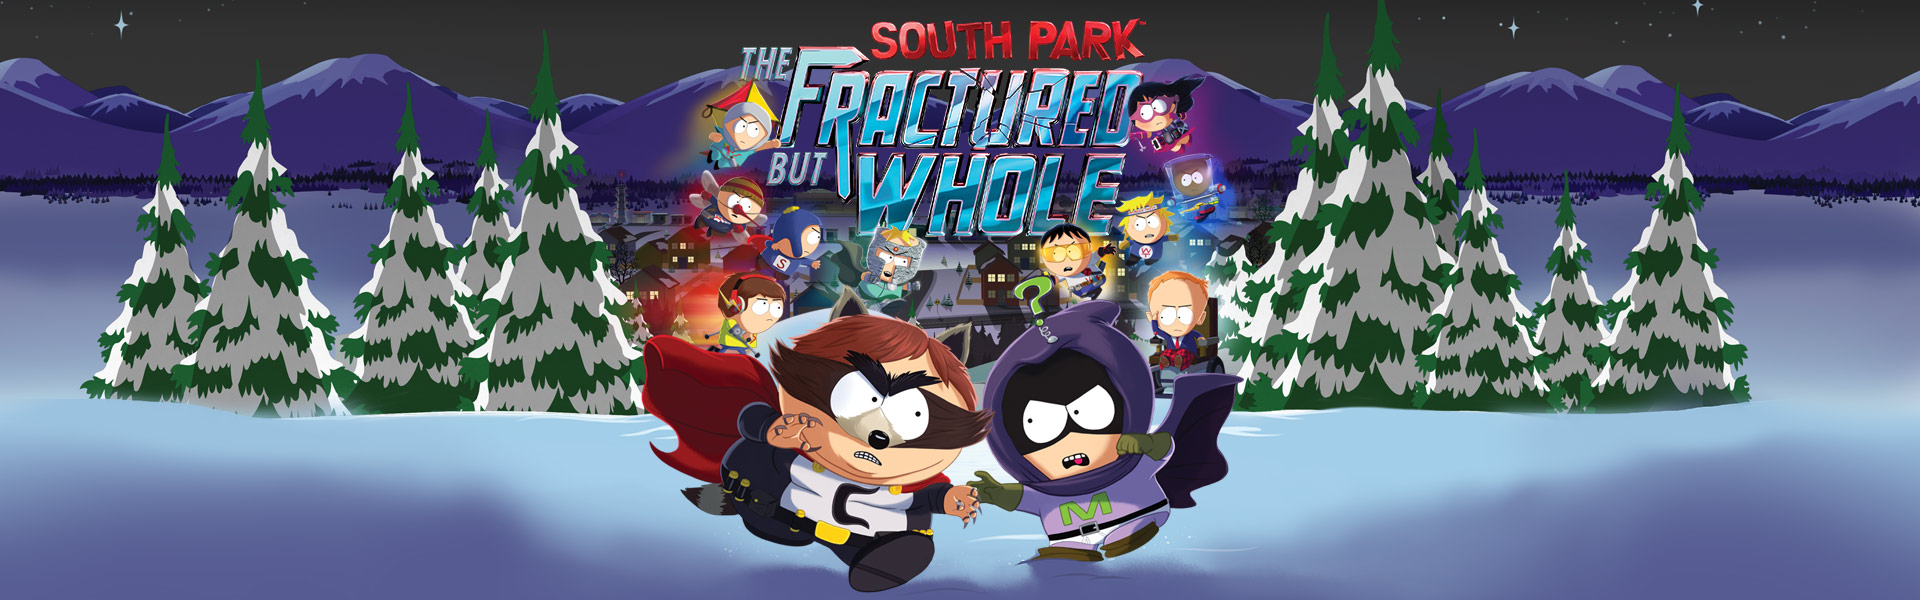 south park fractured but whole the gendering